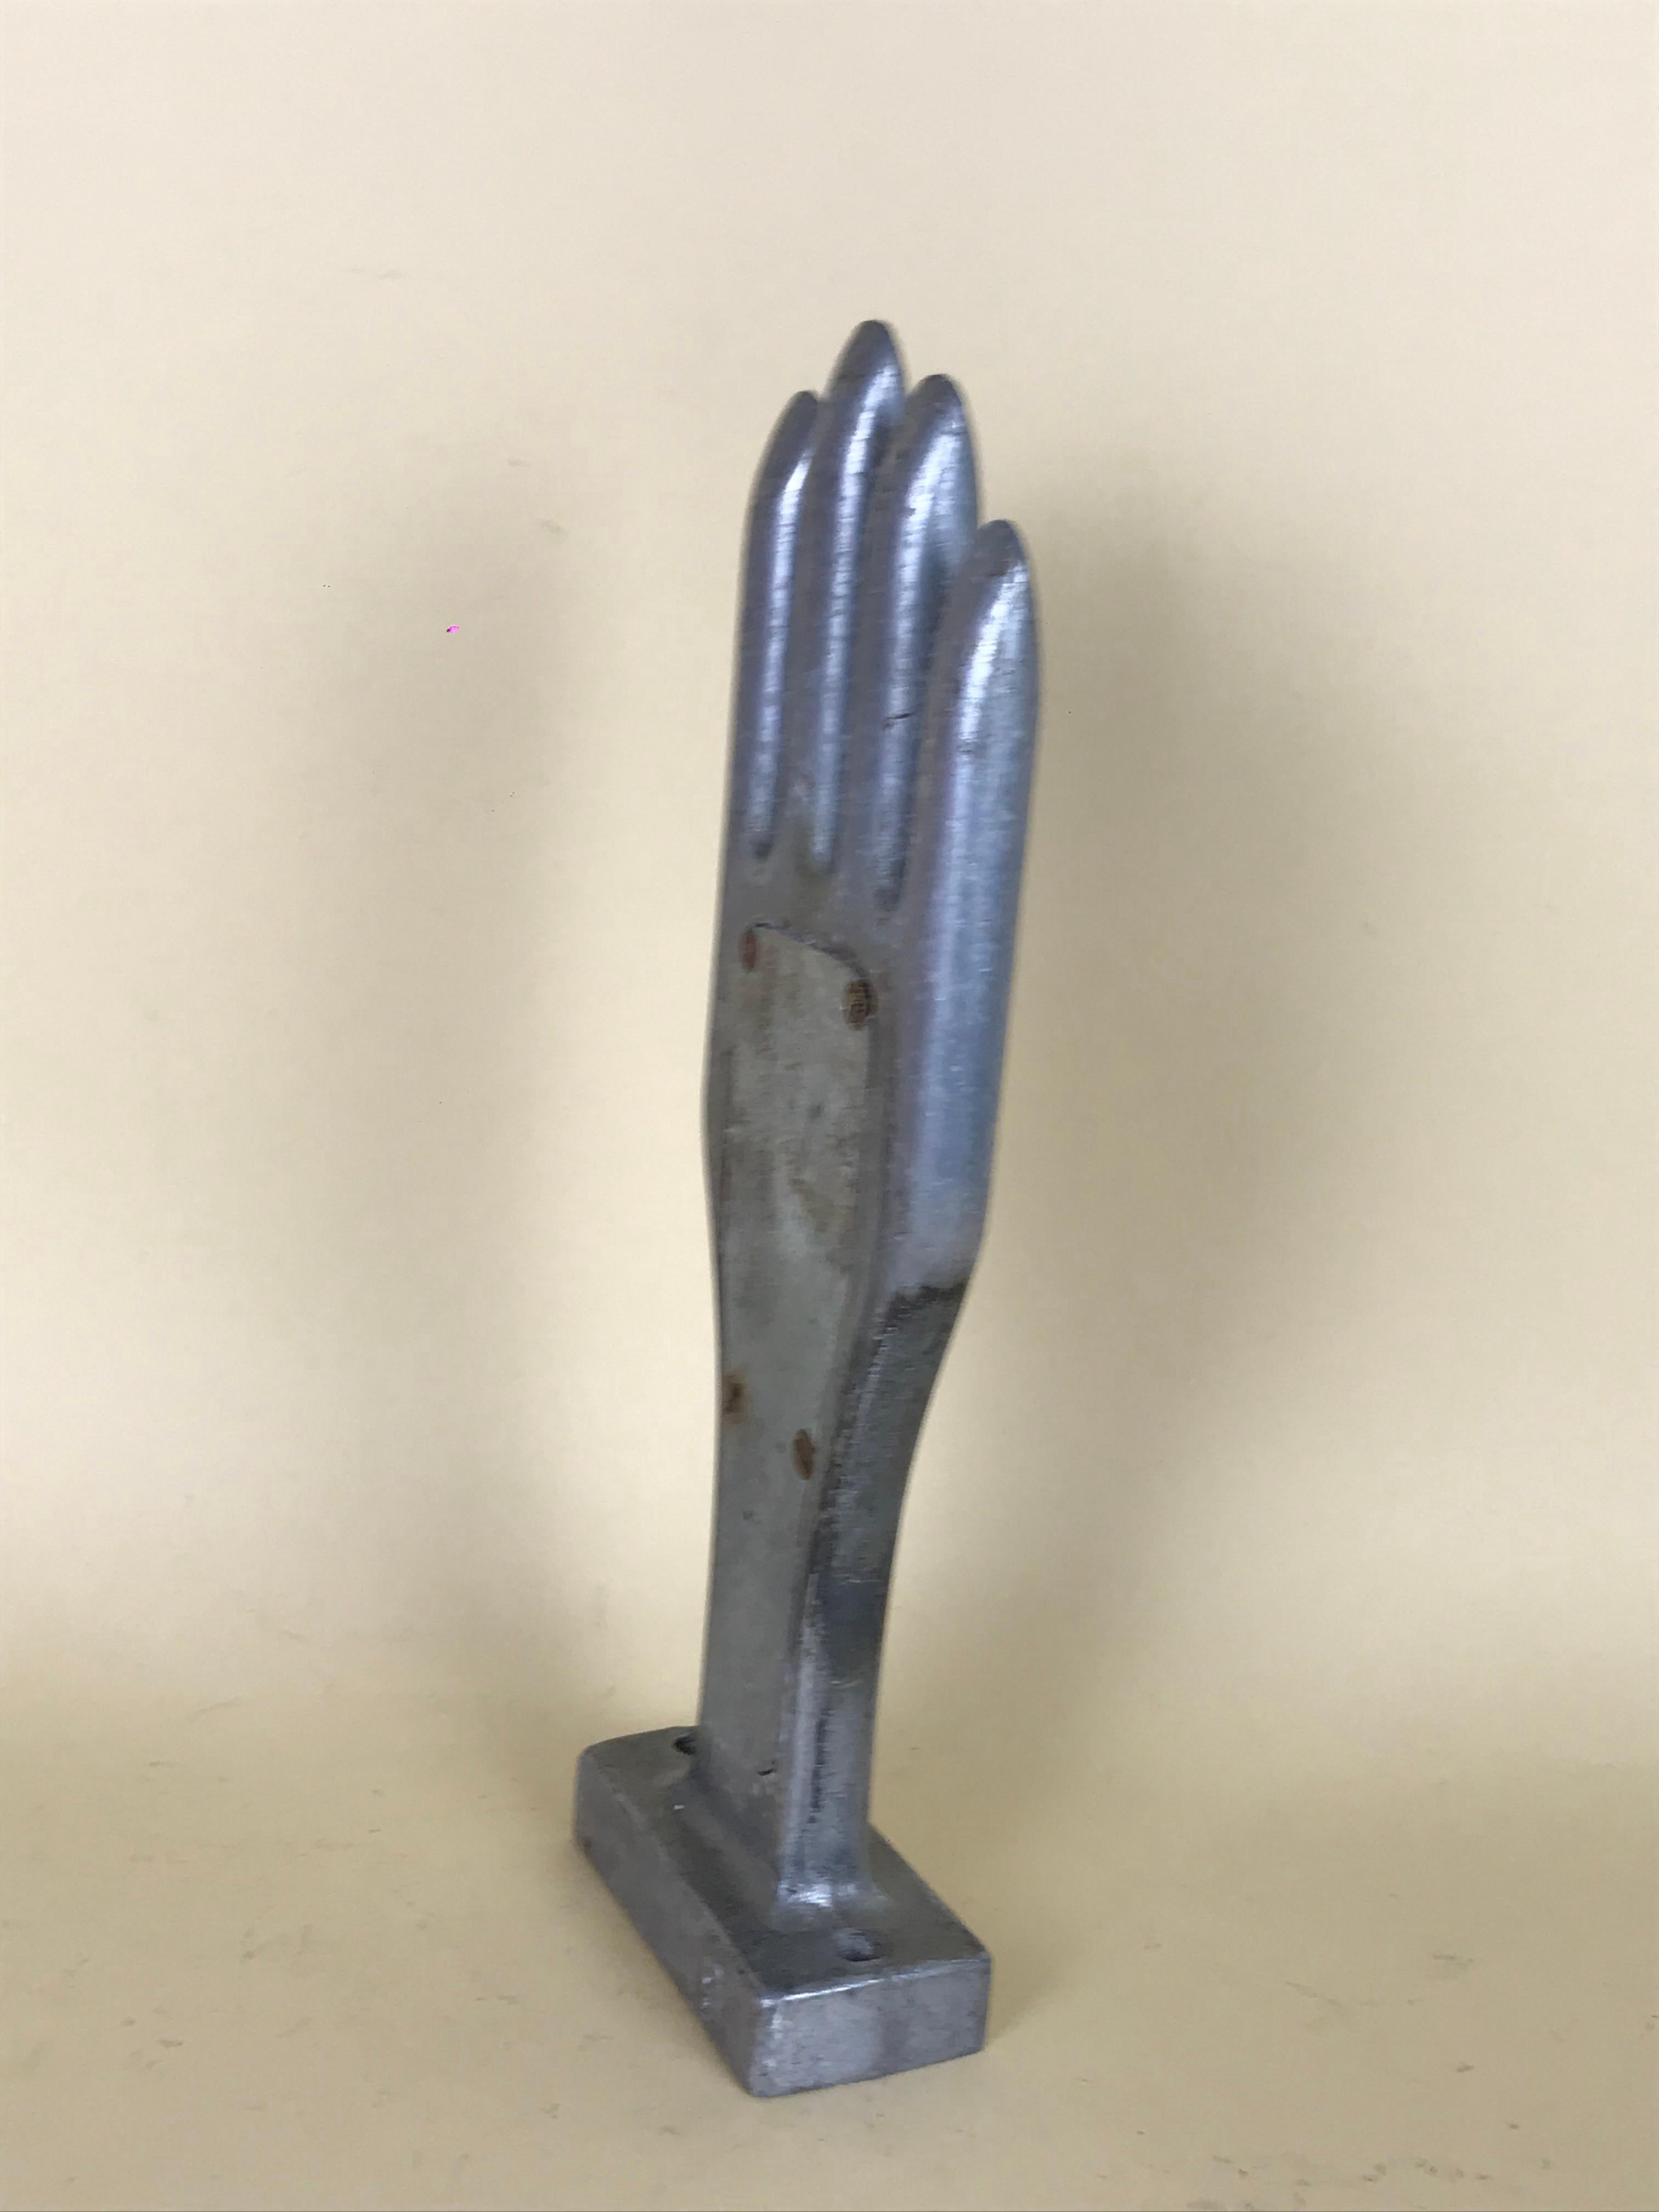 1950s Vintage French Freestanding Aluminium Industrial Leather Glove Mold 5